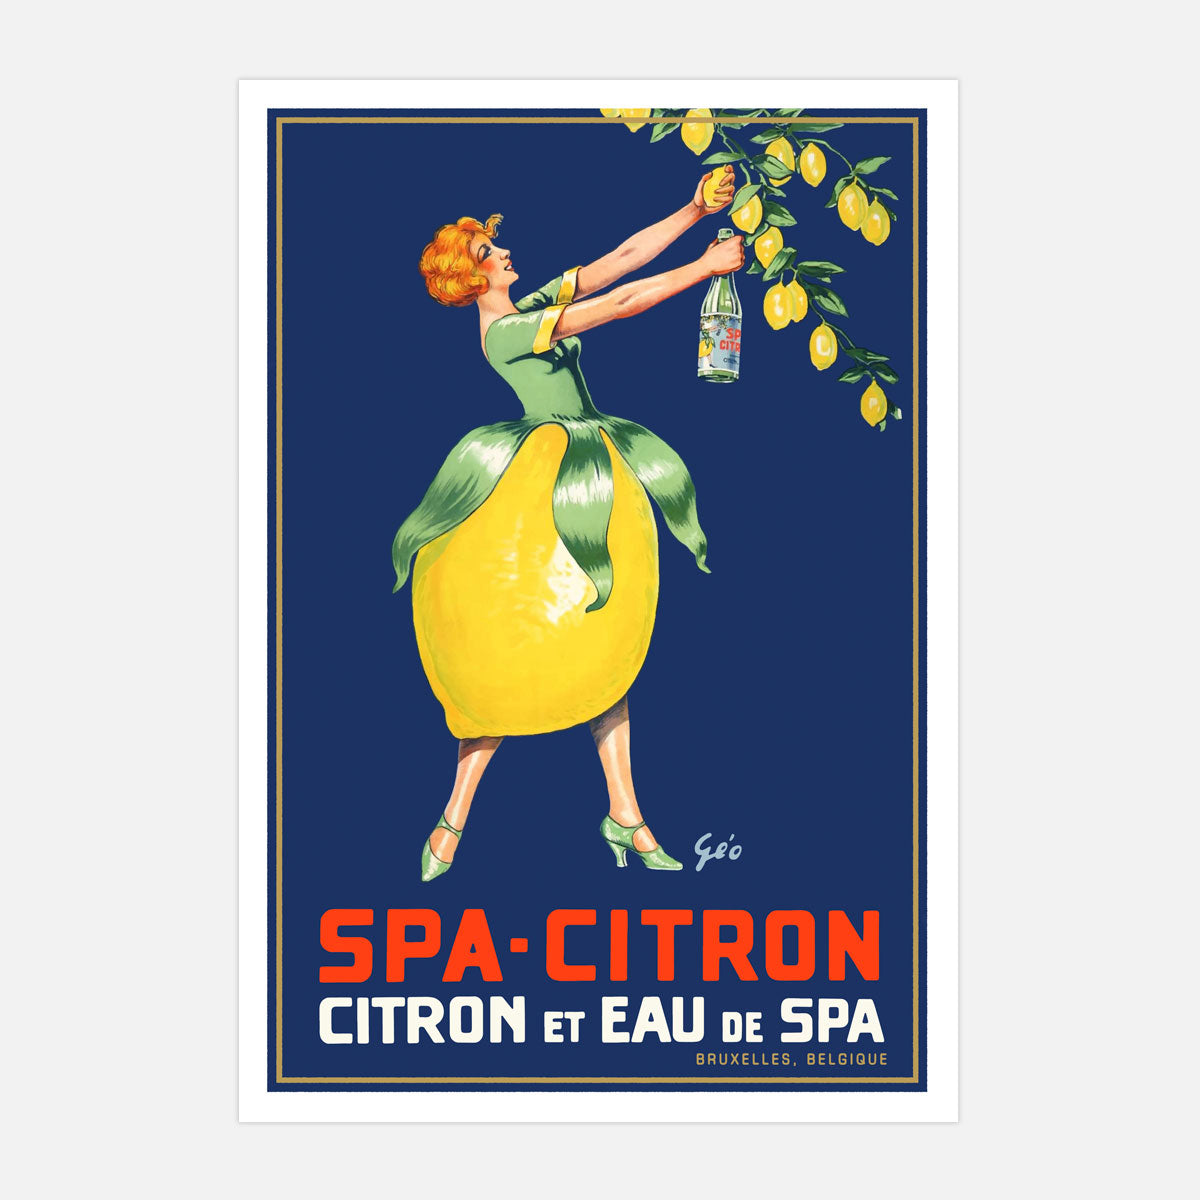 Spa Citron Belgium advertising poster from Places We Luv